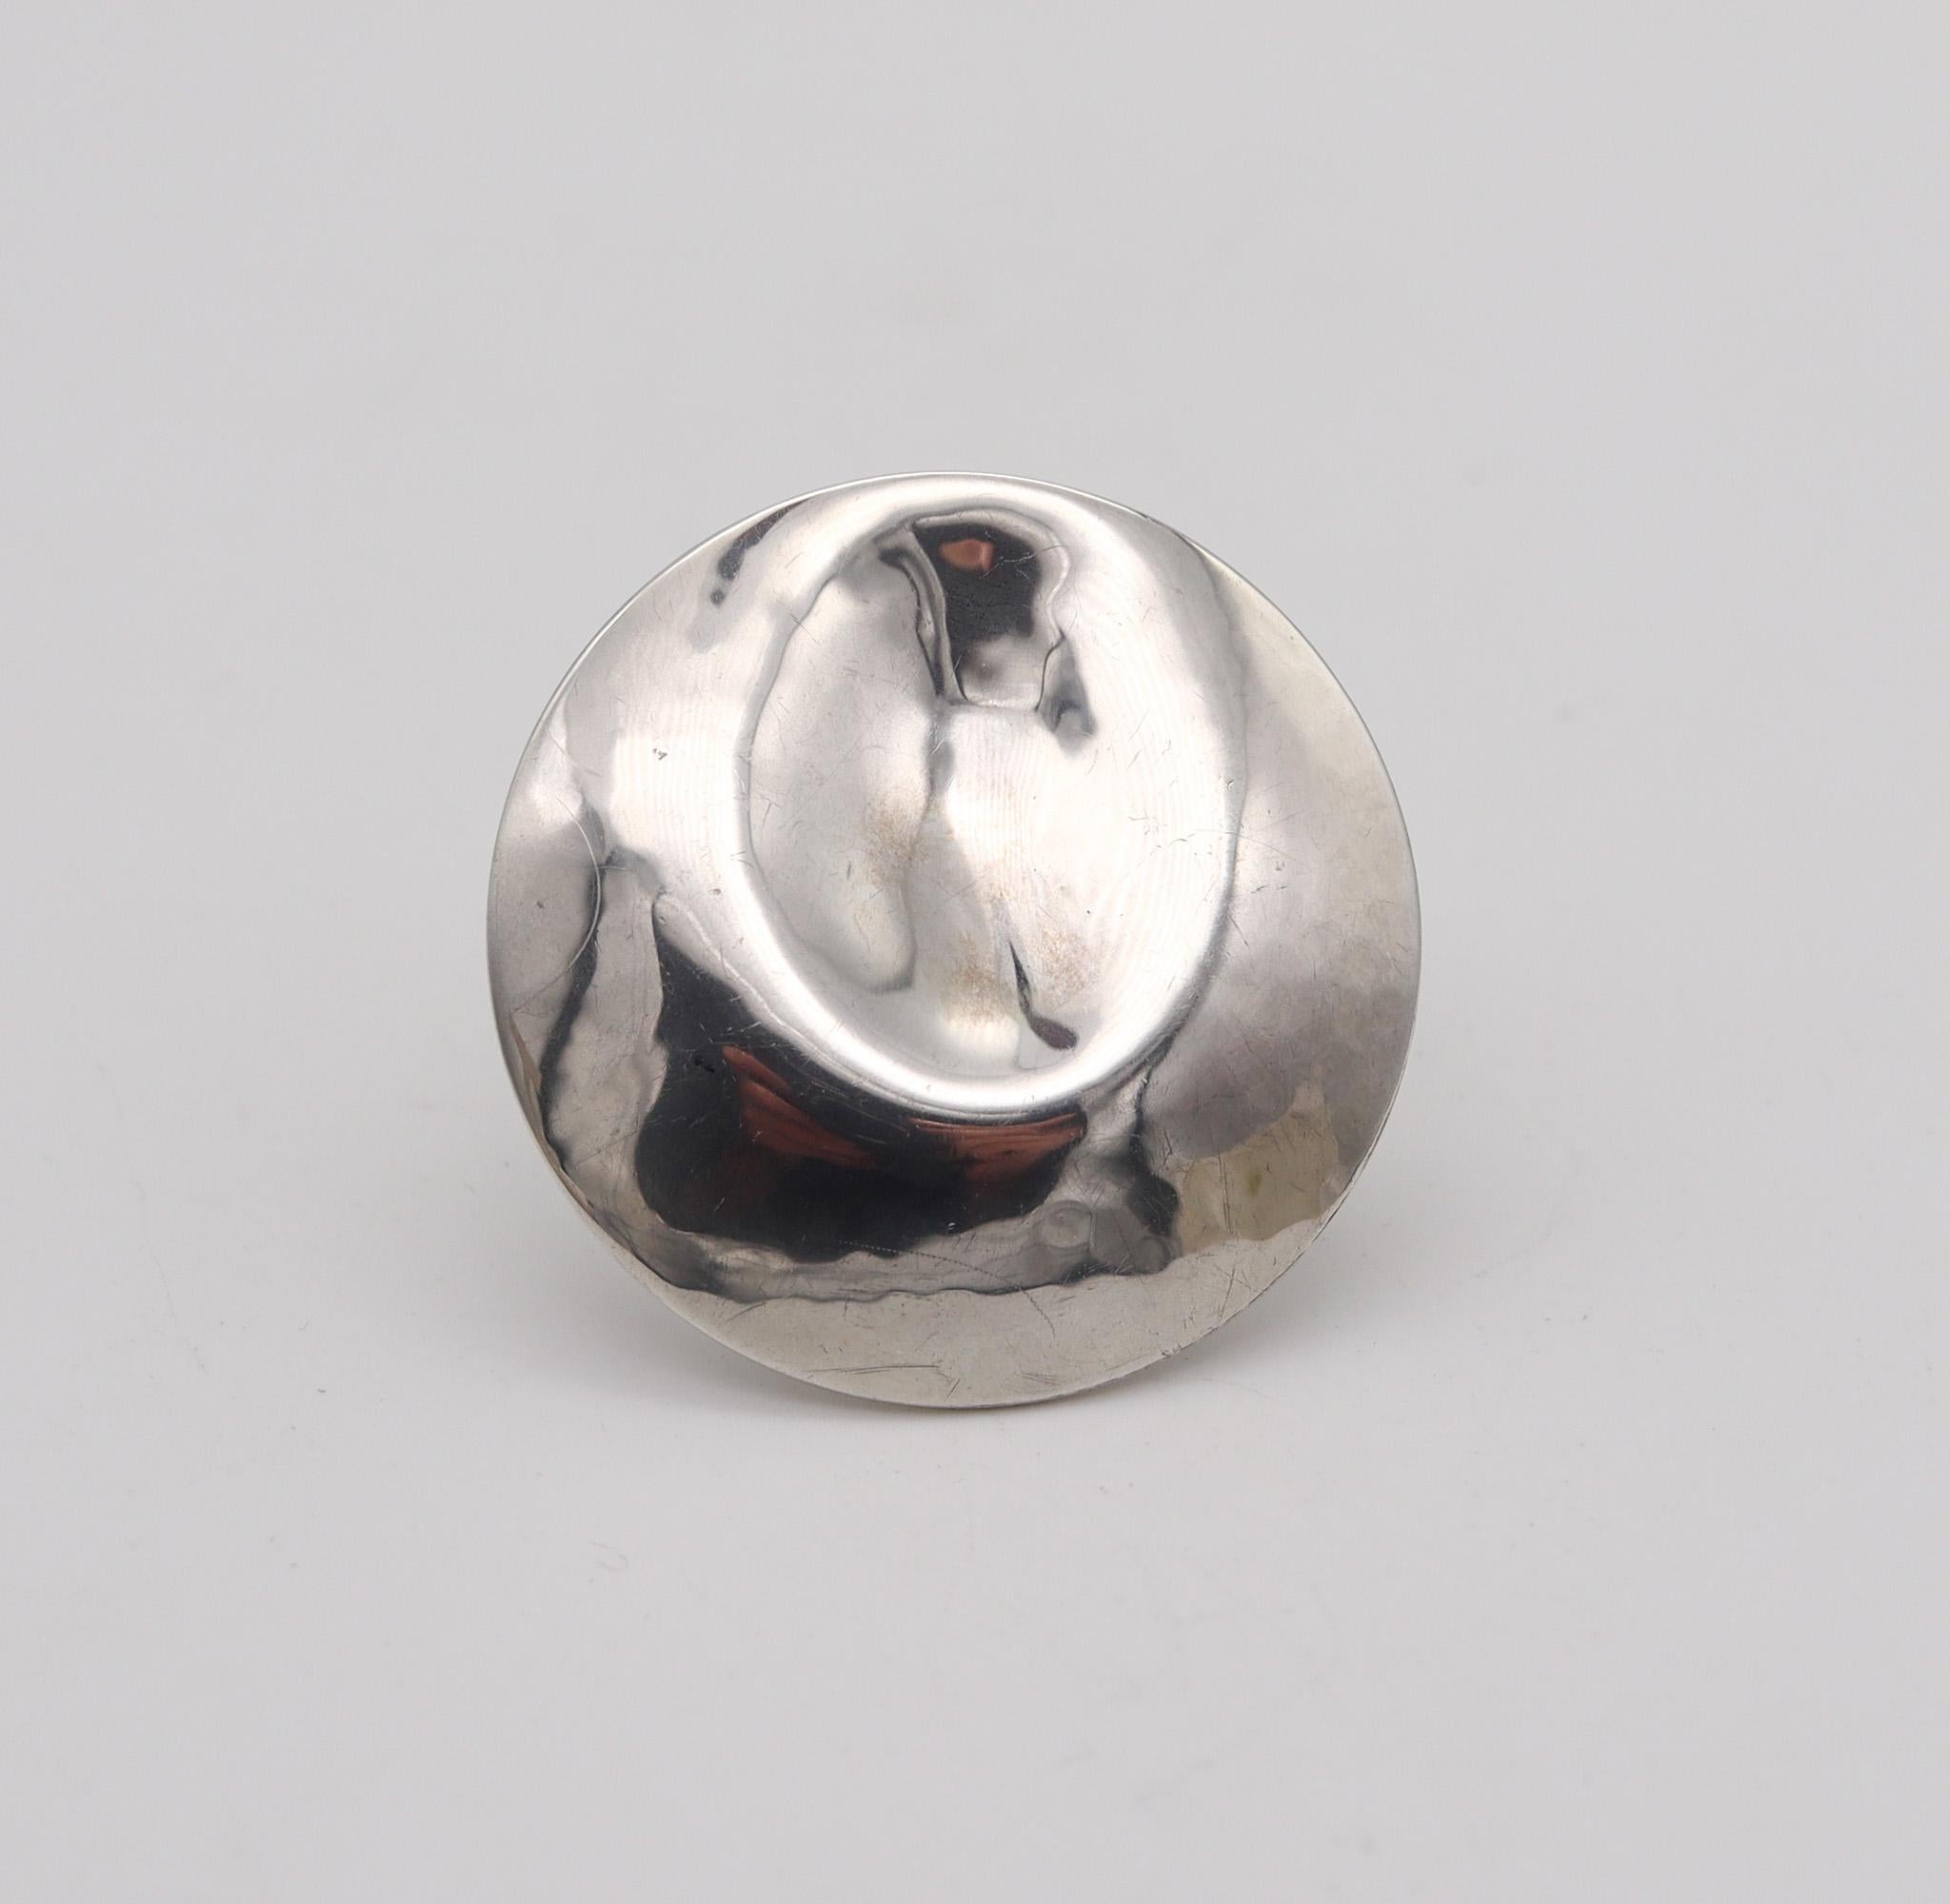 Modernist ring designed by Owe Johansson.

Fabulous modernist ring, created in Finland by the artist silversmith Owe Johansson, back in the 1970. This ring has been crafted as a large dome with an depressed thumbmark circle in solid .925/.999